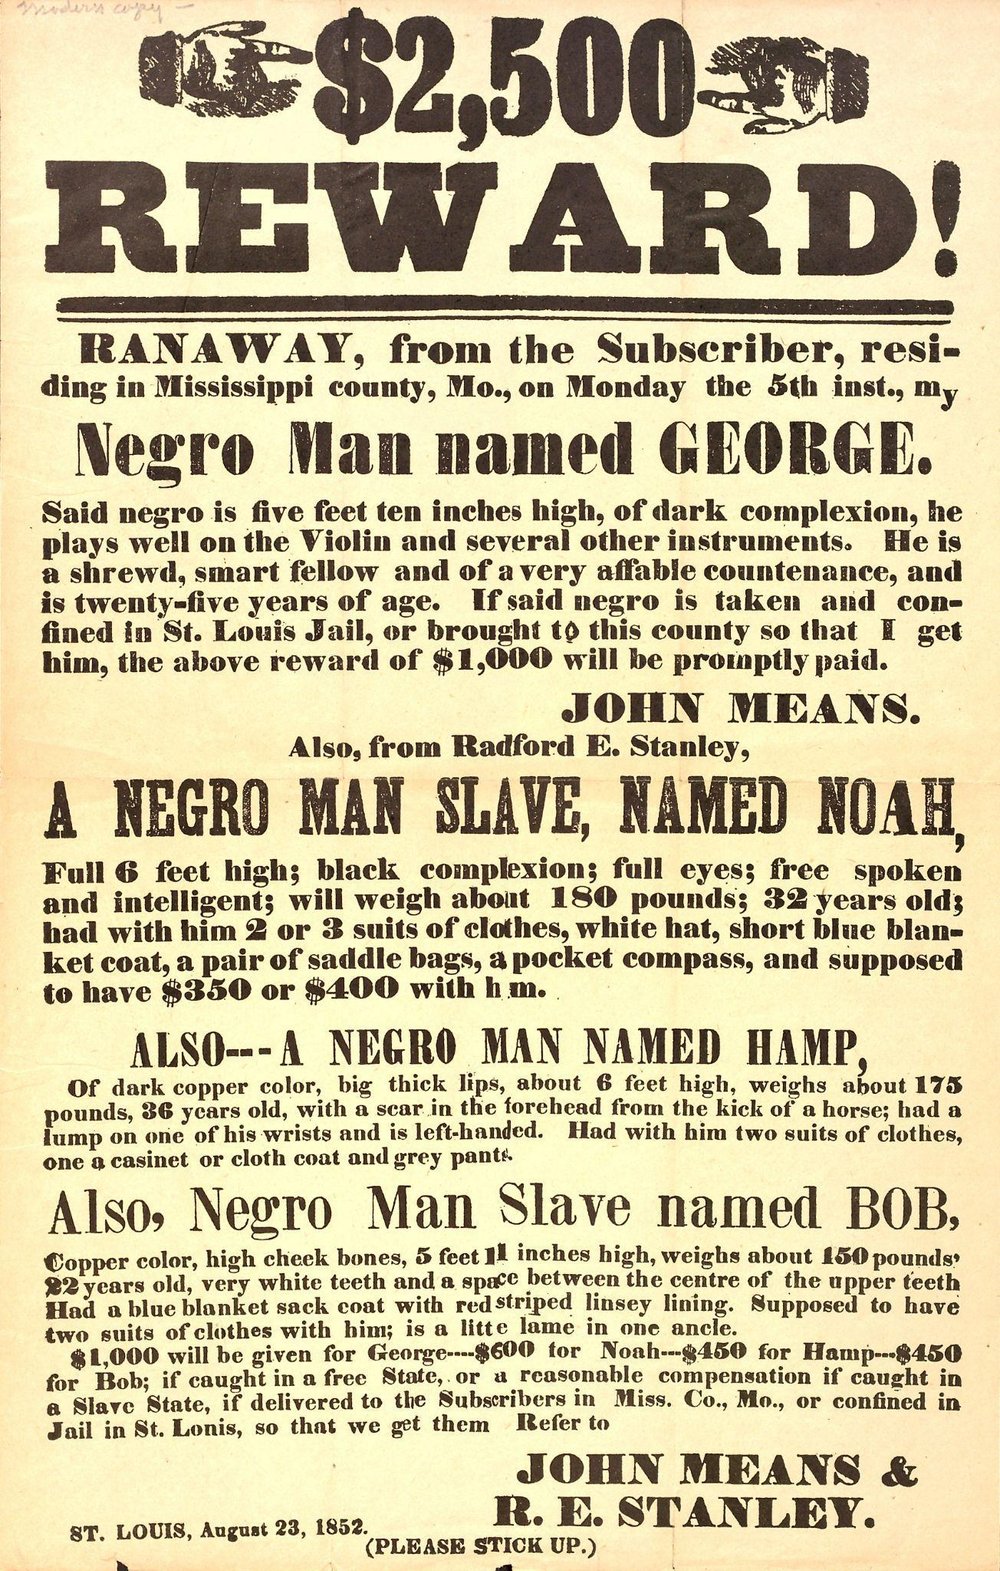  Fig. 3. Means, John, and R. E. Stanley.  $2,500 Reward . August 23, 1852. Image.  http://collections.mohistory.org/resource/216610 &nbsp;(accessed May 25, 2022) 